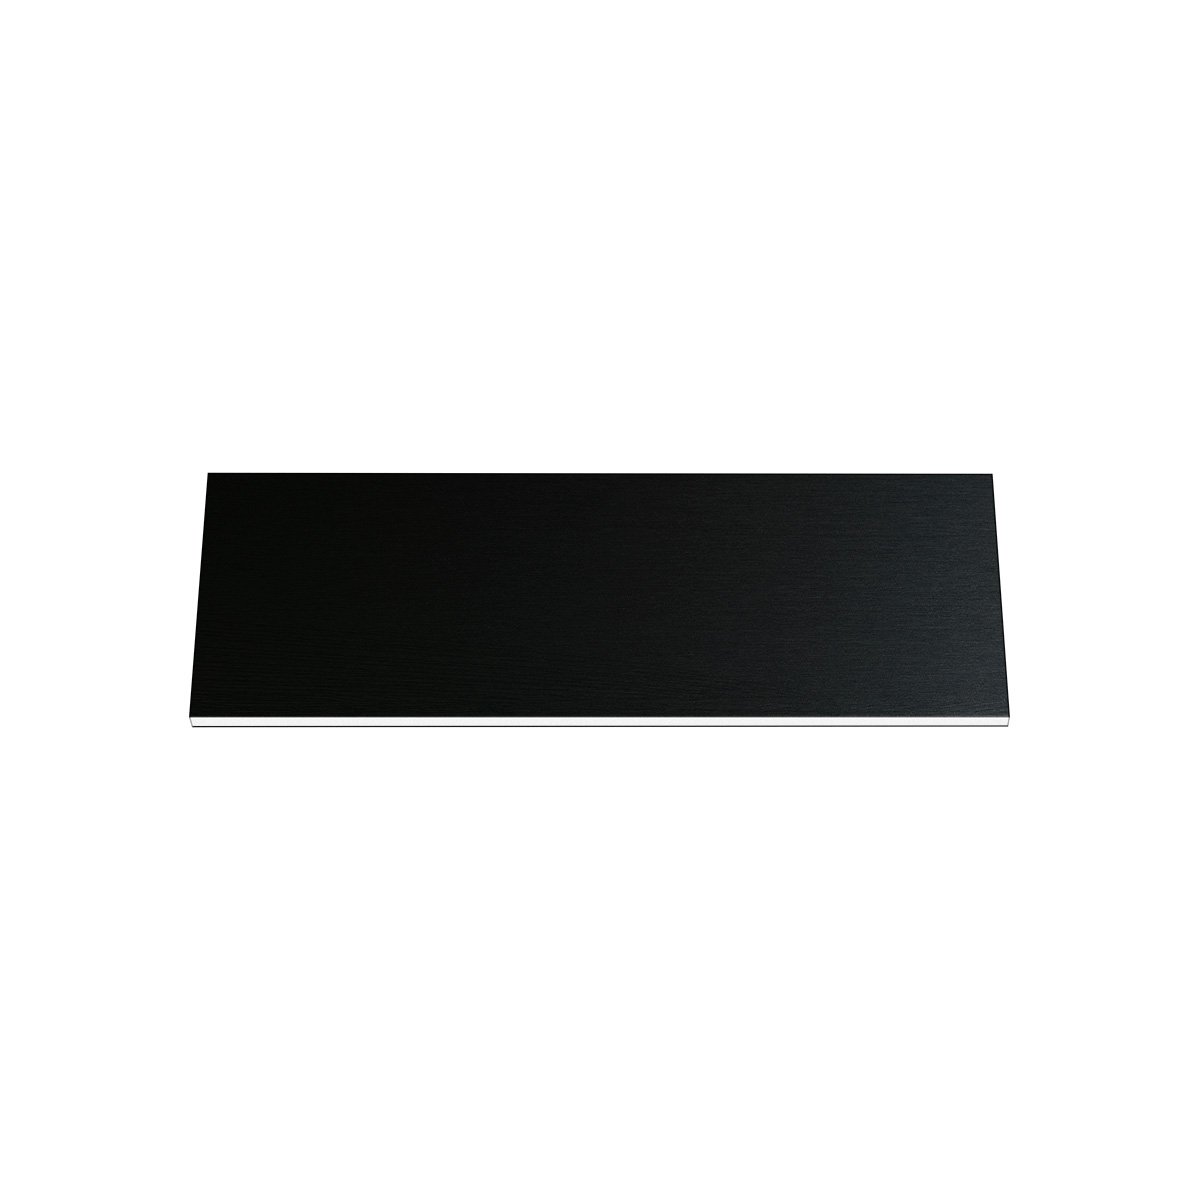 Engraving plate, Resopal, black, rectangular, 50 x 15 mm, 1,5 mm thick, with adhesive